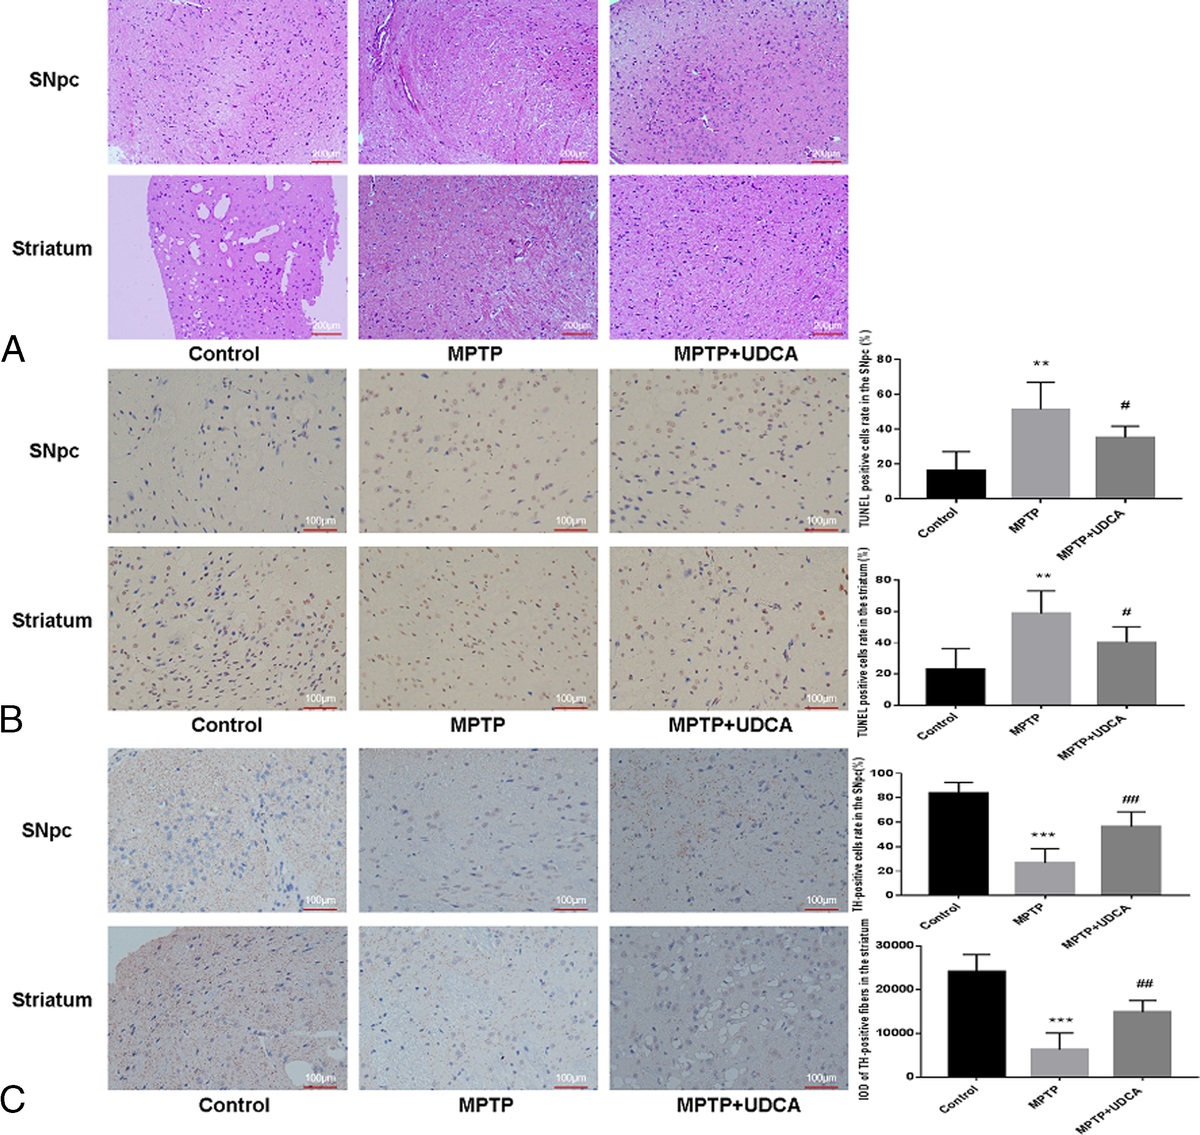 Protective Effects of Ursodeoxycholic Acid Against Oxidative Stress and Neuroinflammation Through Mitogen-Activated Protein Kinases Pathway in MPTP-Induced Parkinson Disease